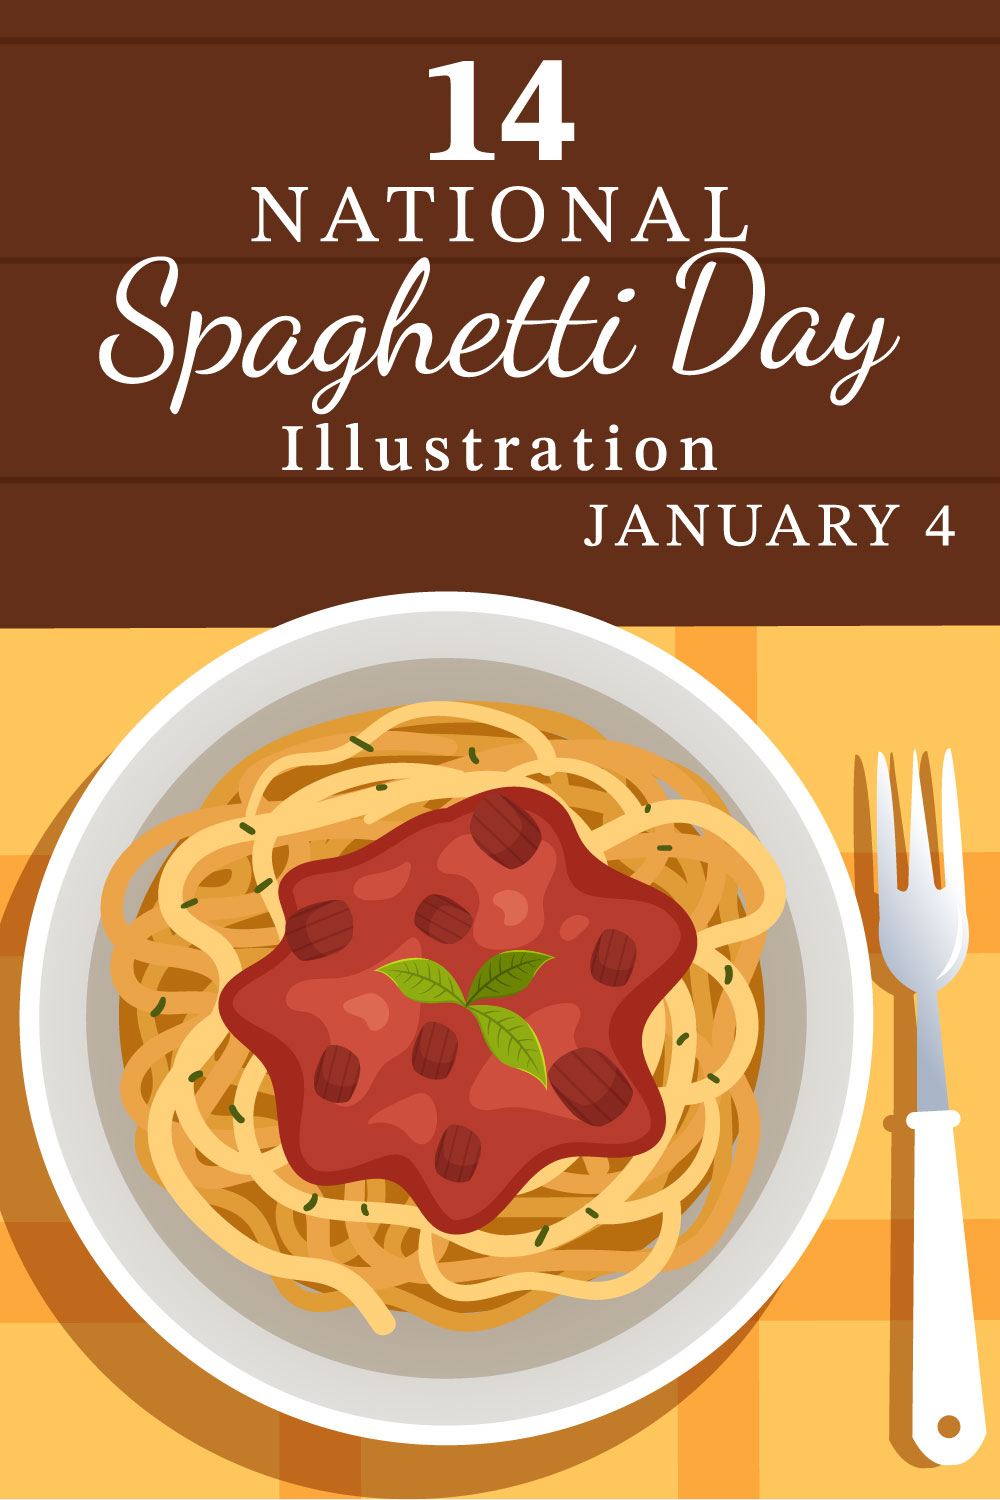 14 National Spaghetti Day Illustration - pinterest image preview.